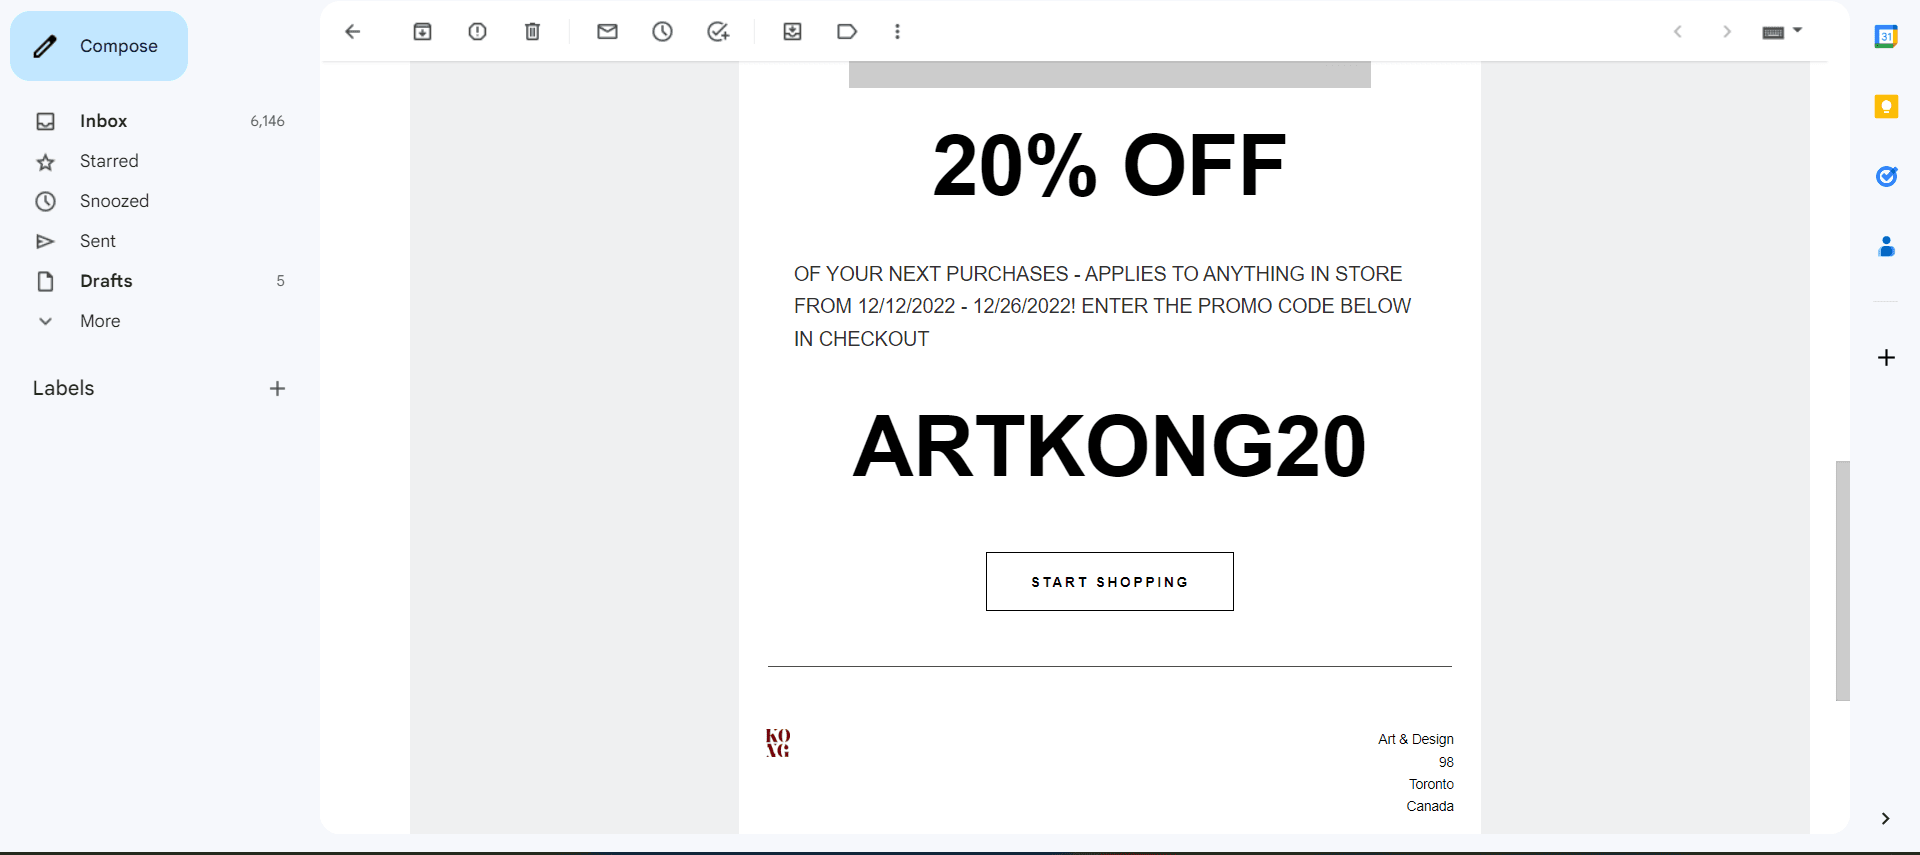 An email shows 20% off of your next purchases using the provided coupon code